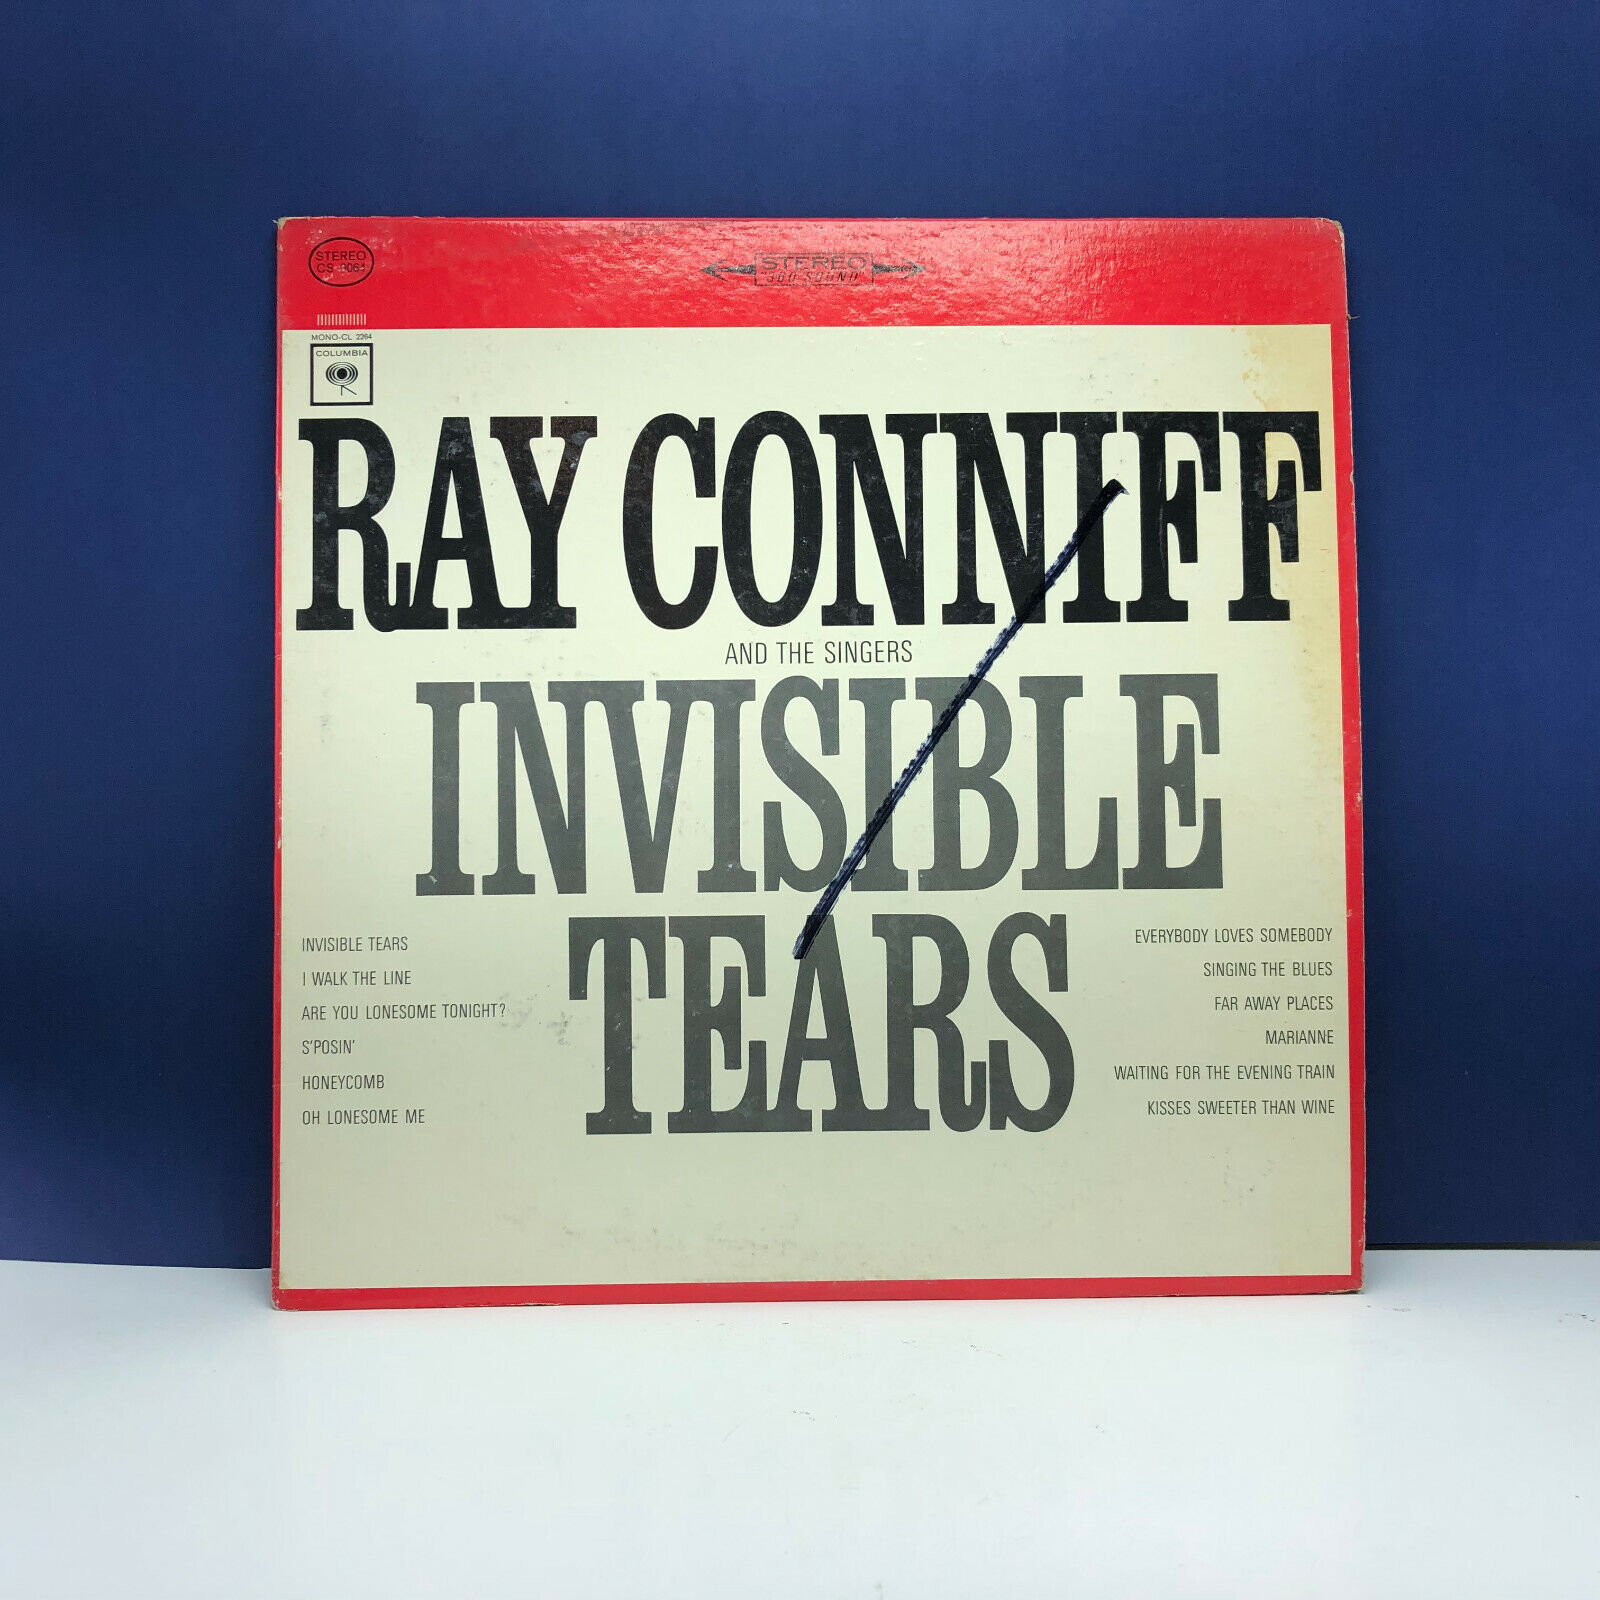 Vinyl Record LP 12 inch 12" case vtg 33 Ray Conniff invisible tears orchestra us